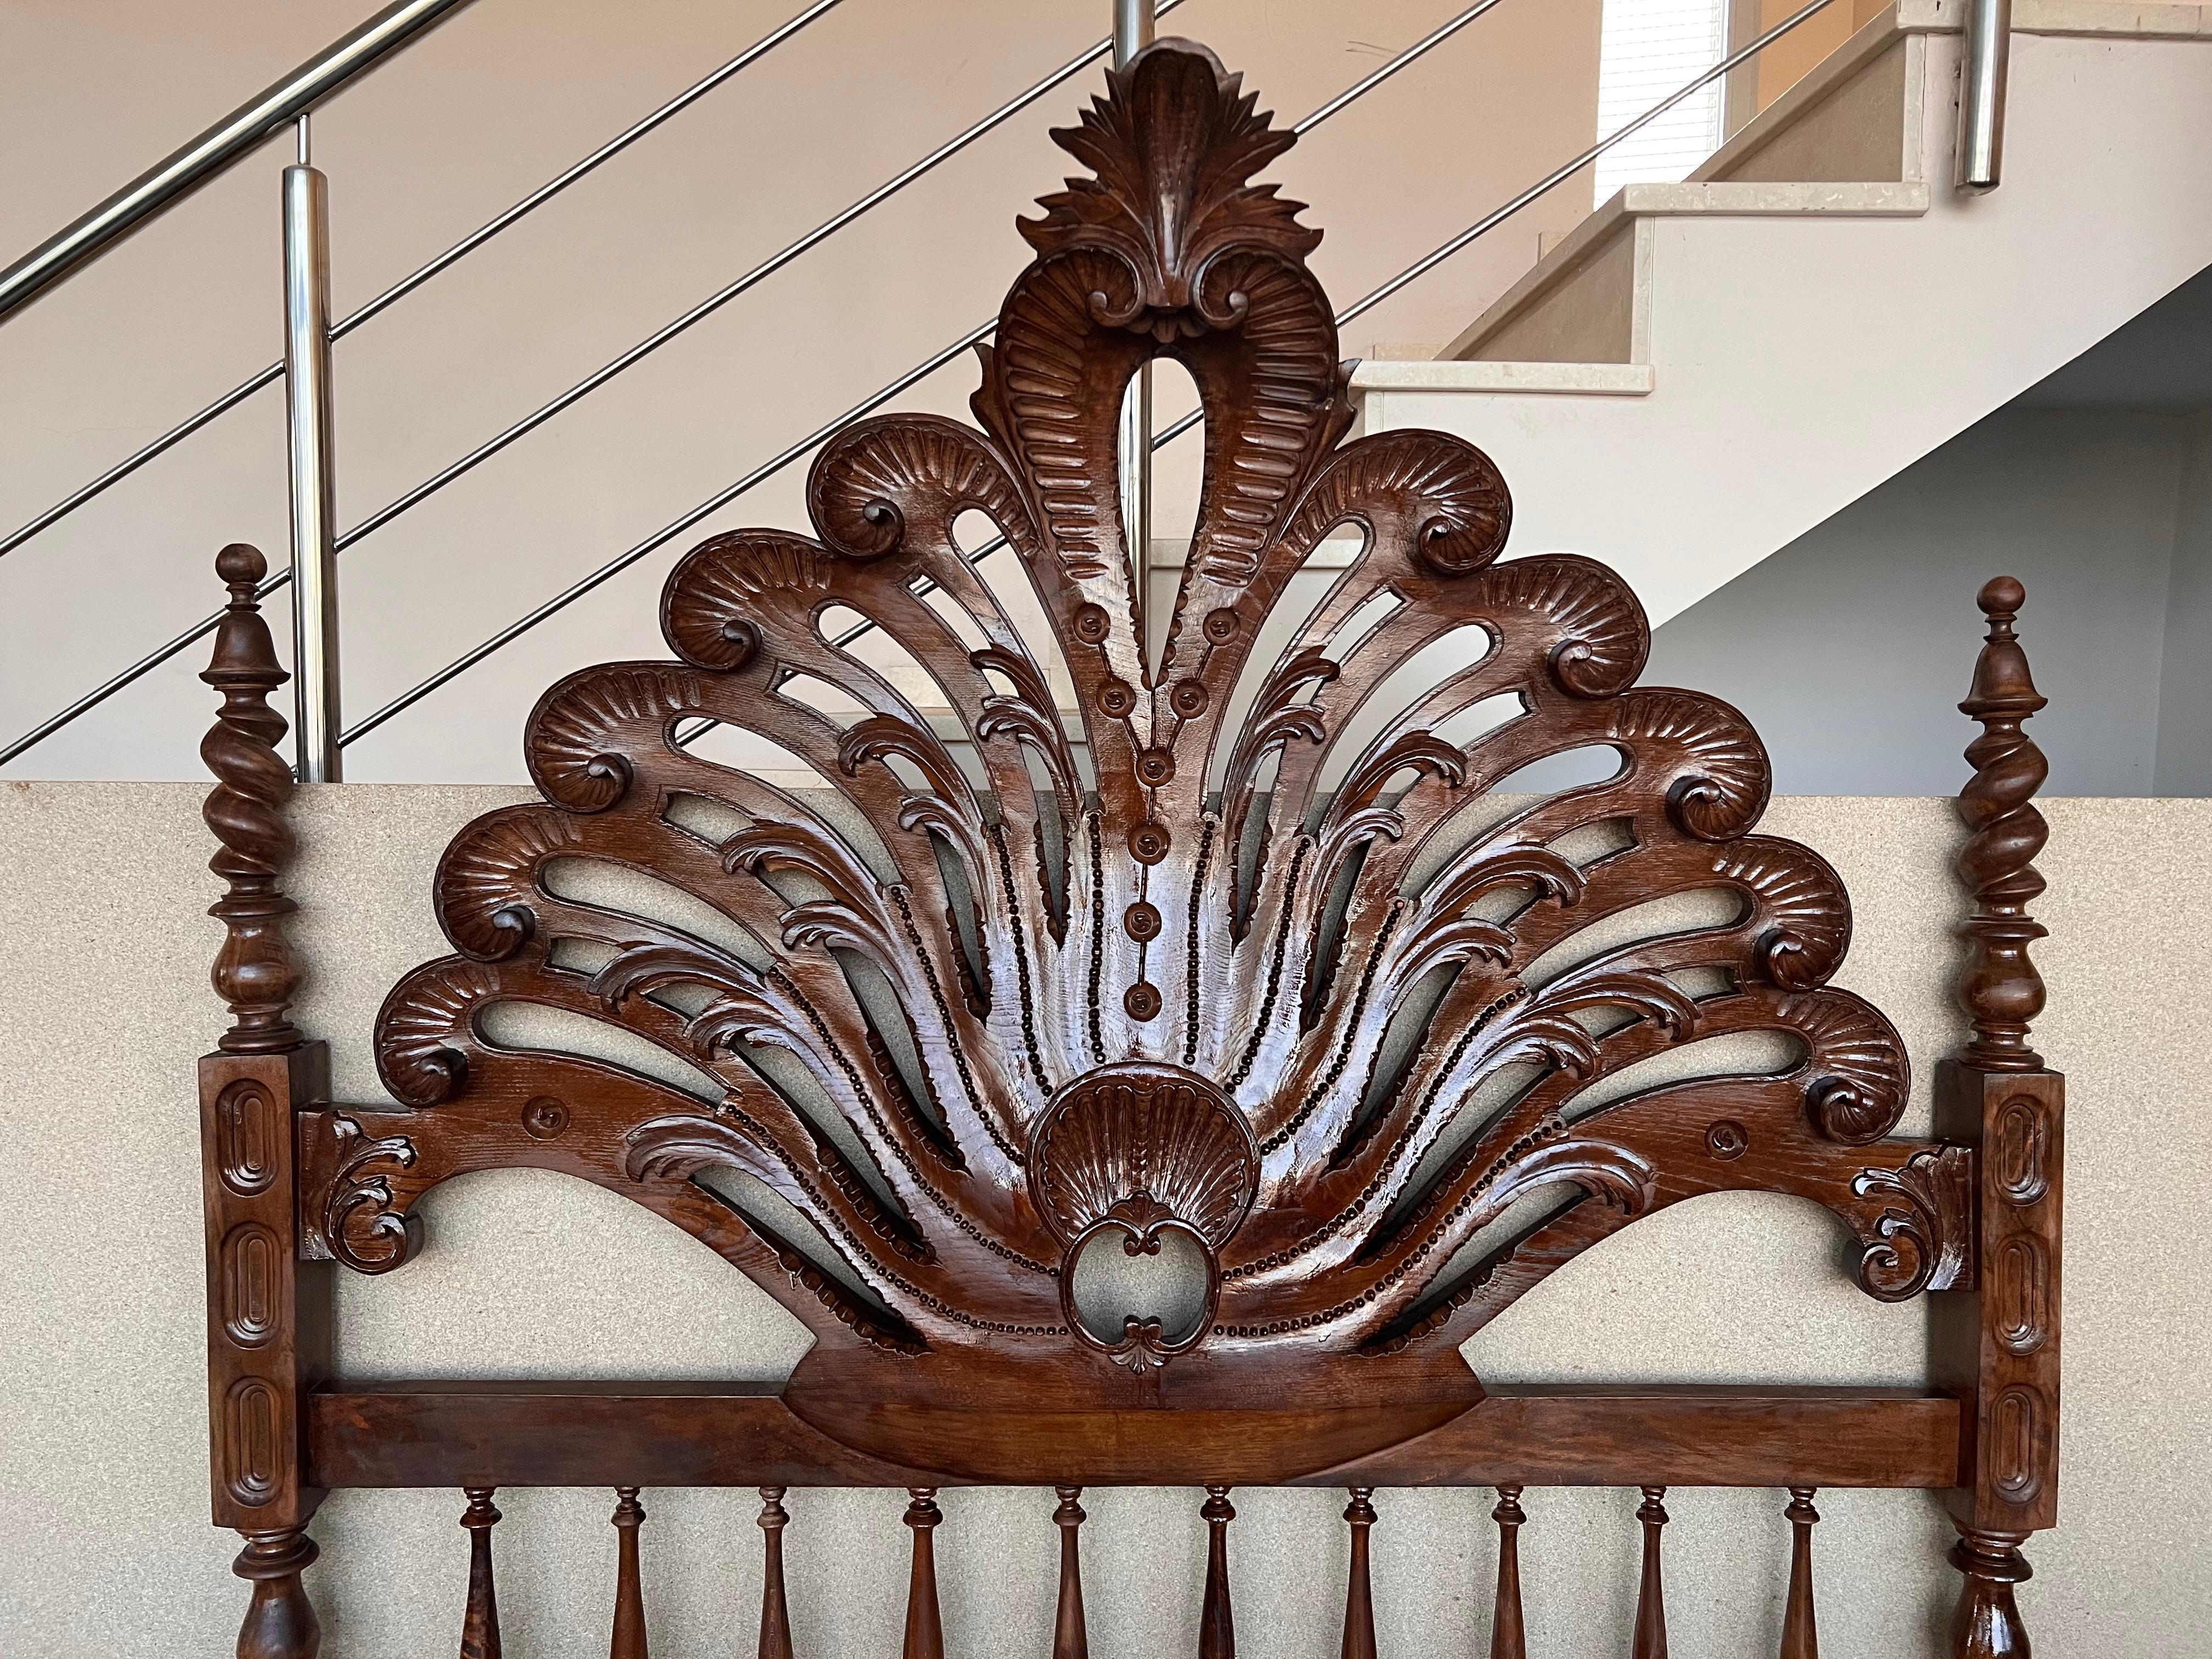 19th century Baroque bed, original Spanish bed.

This queen size 4-poster bed is hand carved with elaborate details, fluted turned post, 3D open spiral twist spindles, and Moorish details represented by the repetition of arches. It is carved and